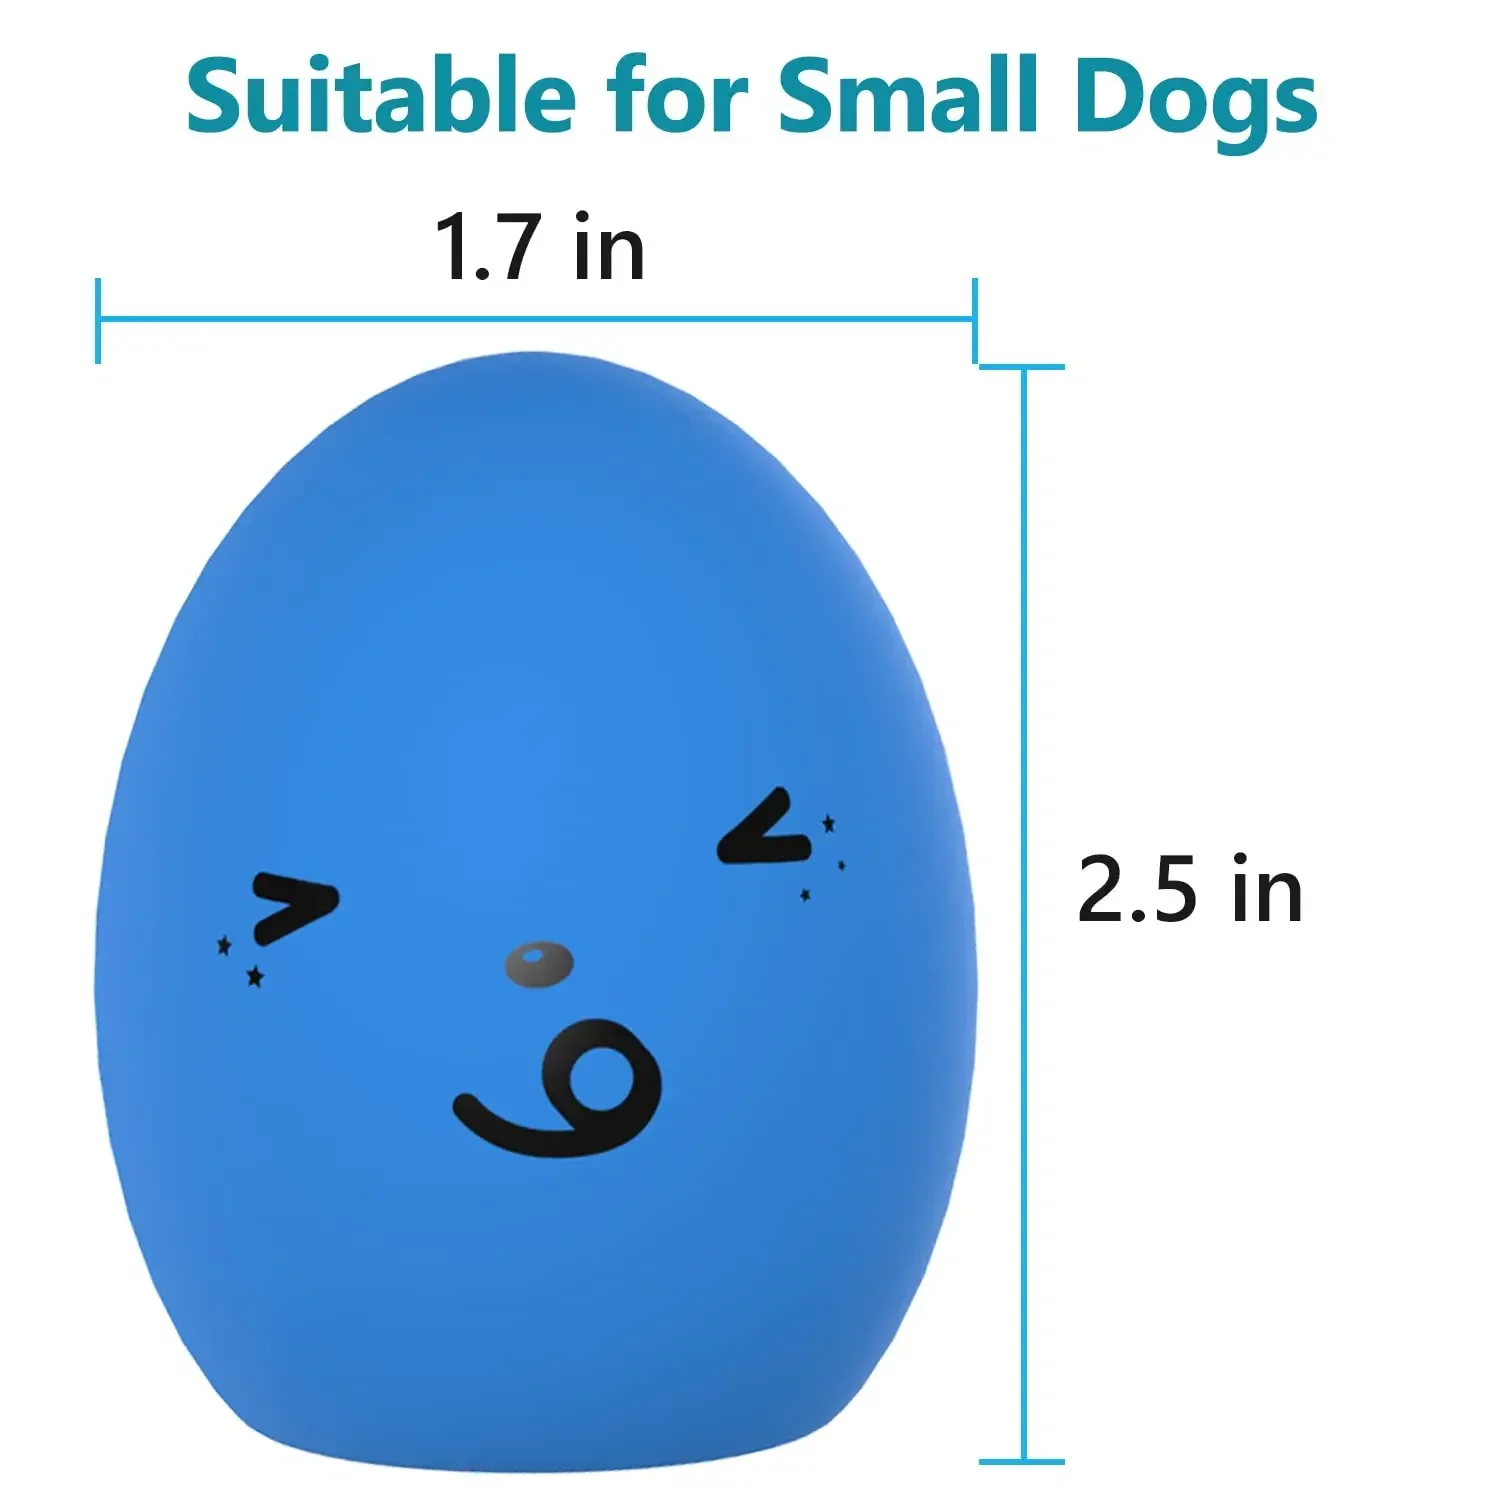 Set 6 Extra Small Squeaky Toys for Dogs Small Puppy Tiny Dogs Natural Rubber (Latex) Complies with Same Safety Standards As Children’